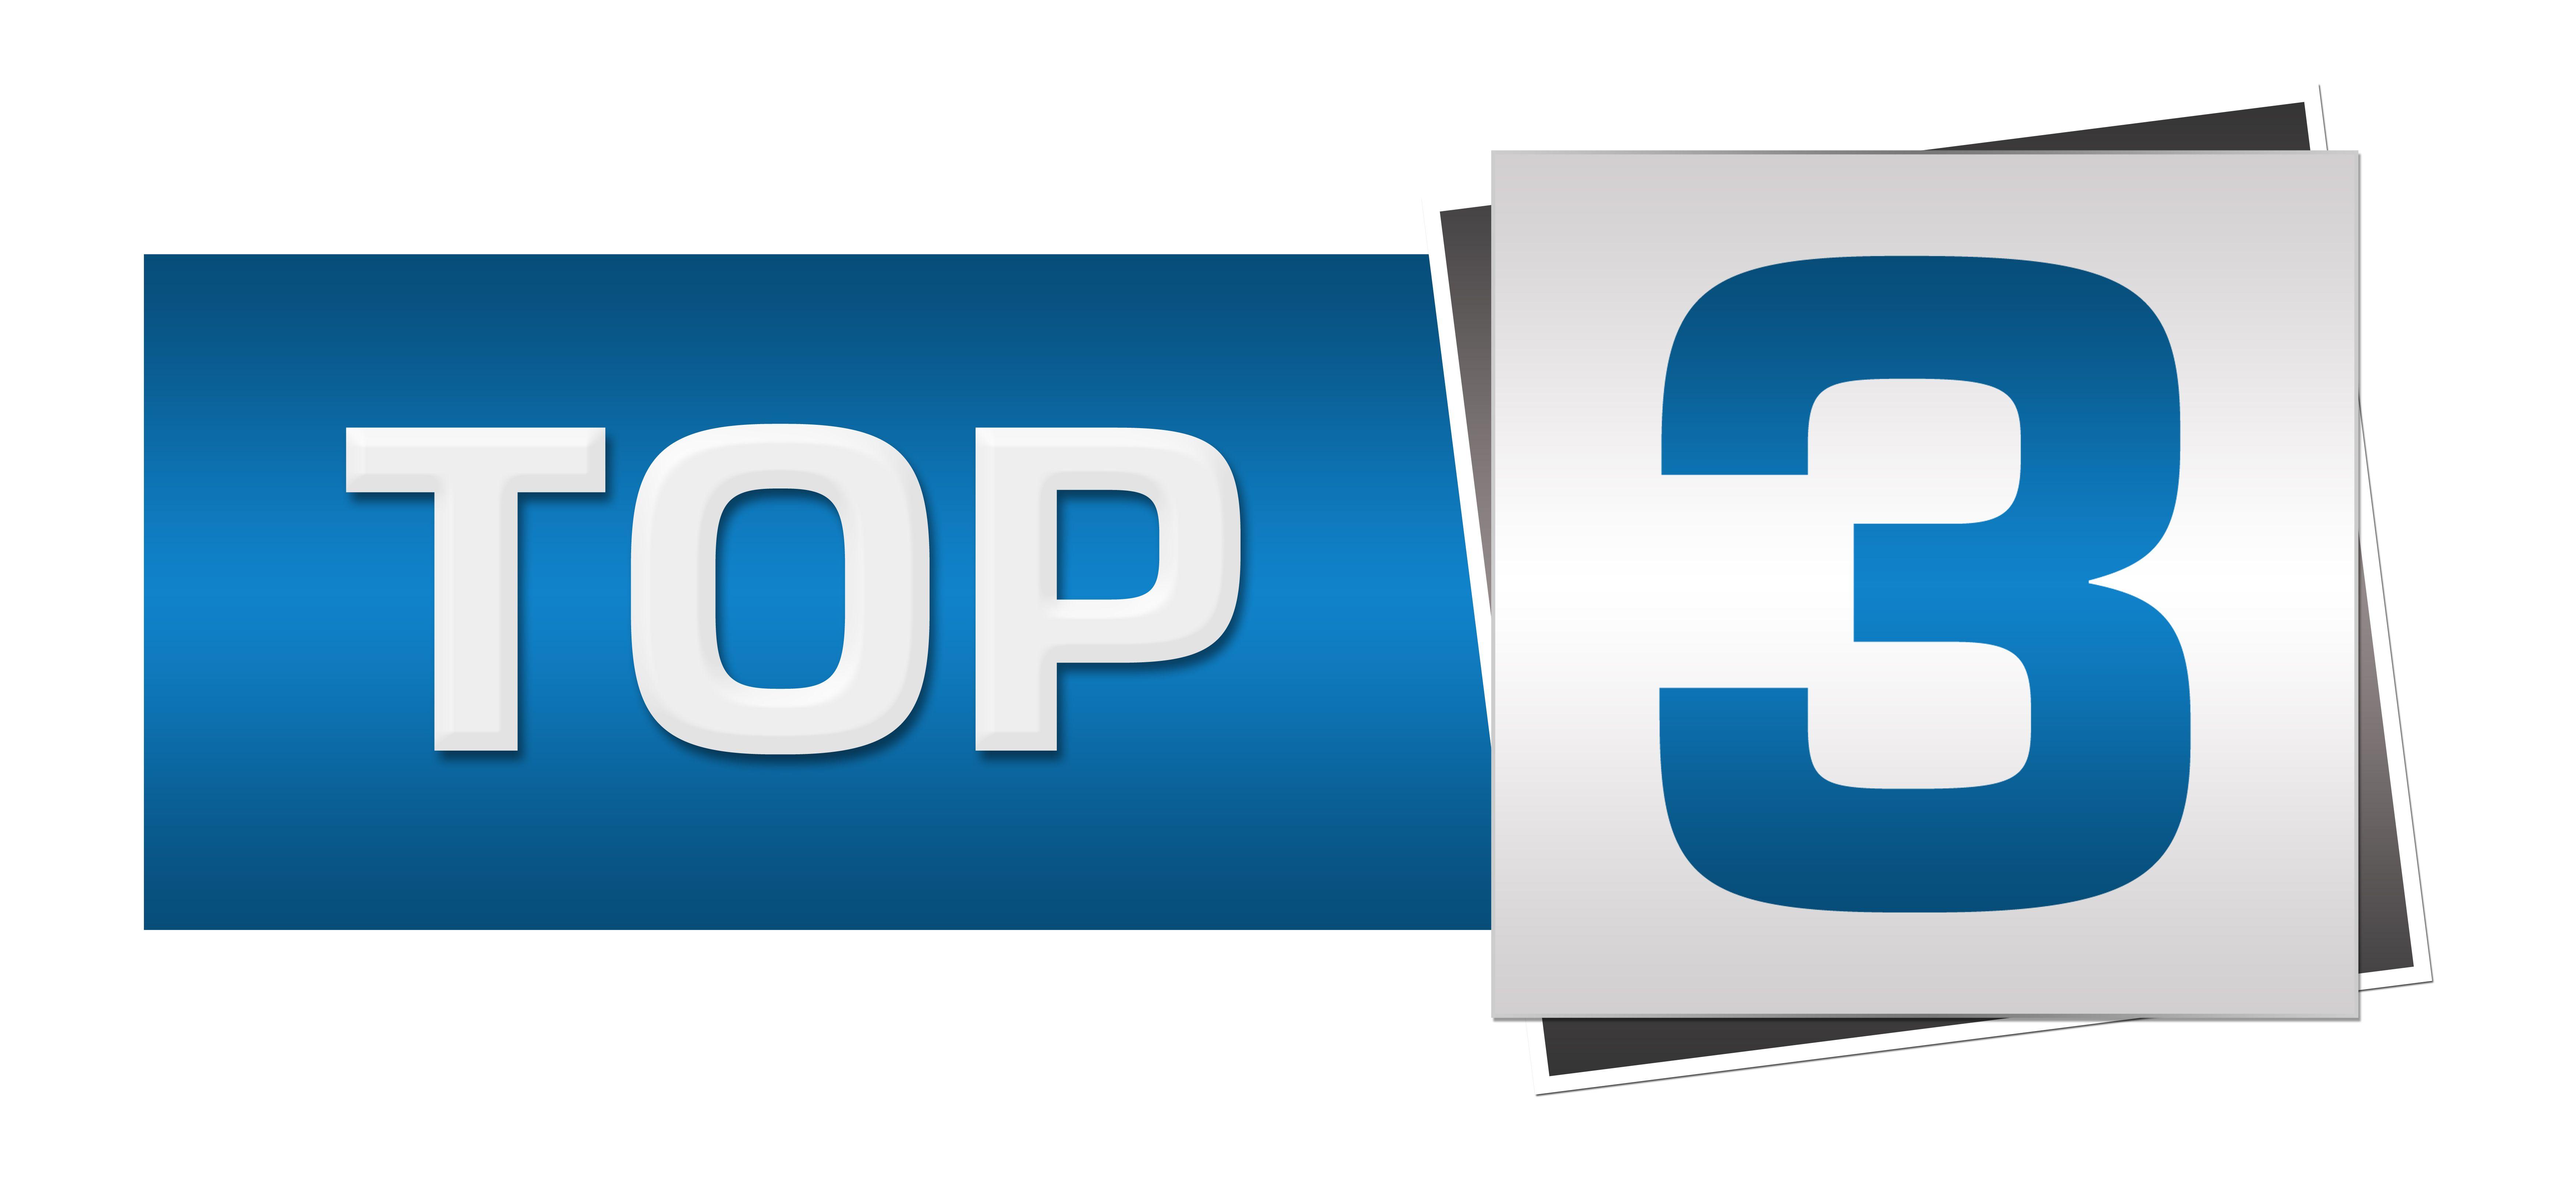 Top 3 Logo - Top 3 Questions Answered: Fiber Optic Cleaning - VIAVI Perspectives